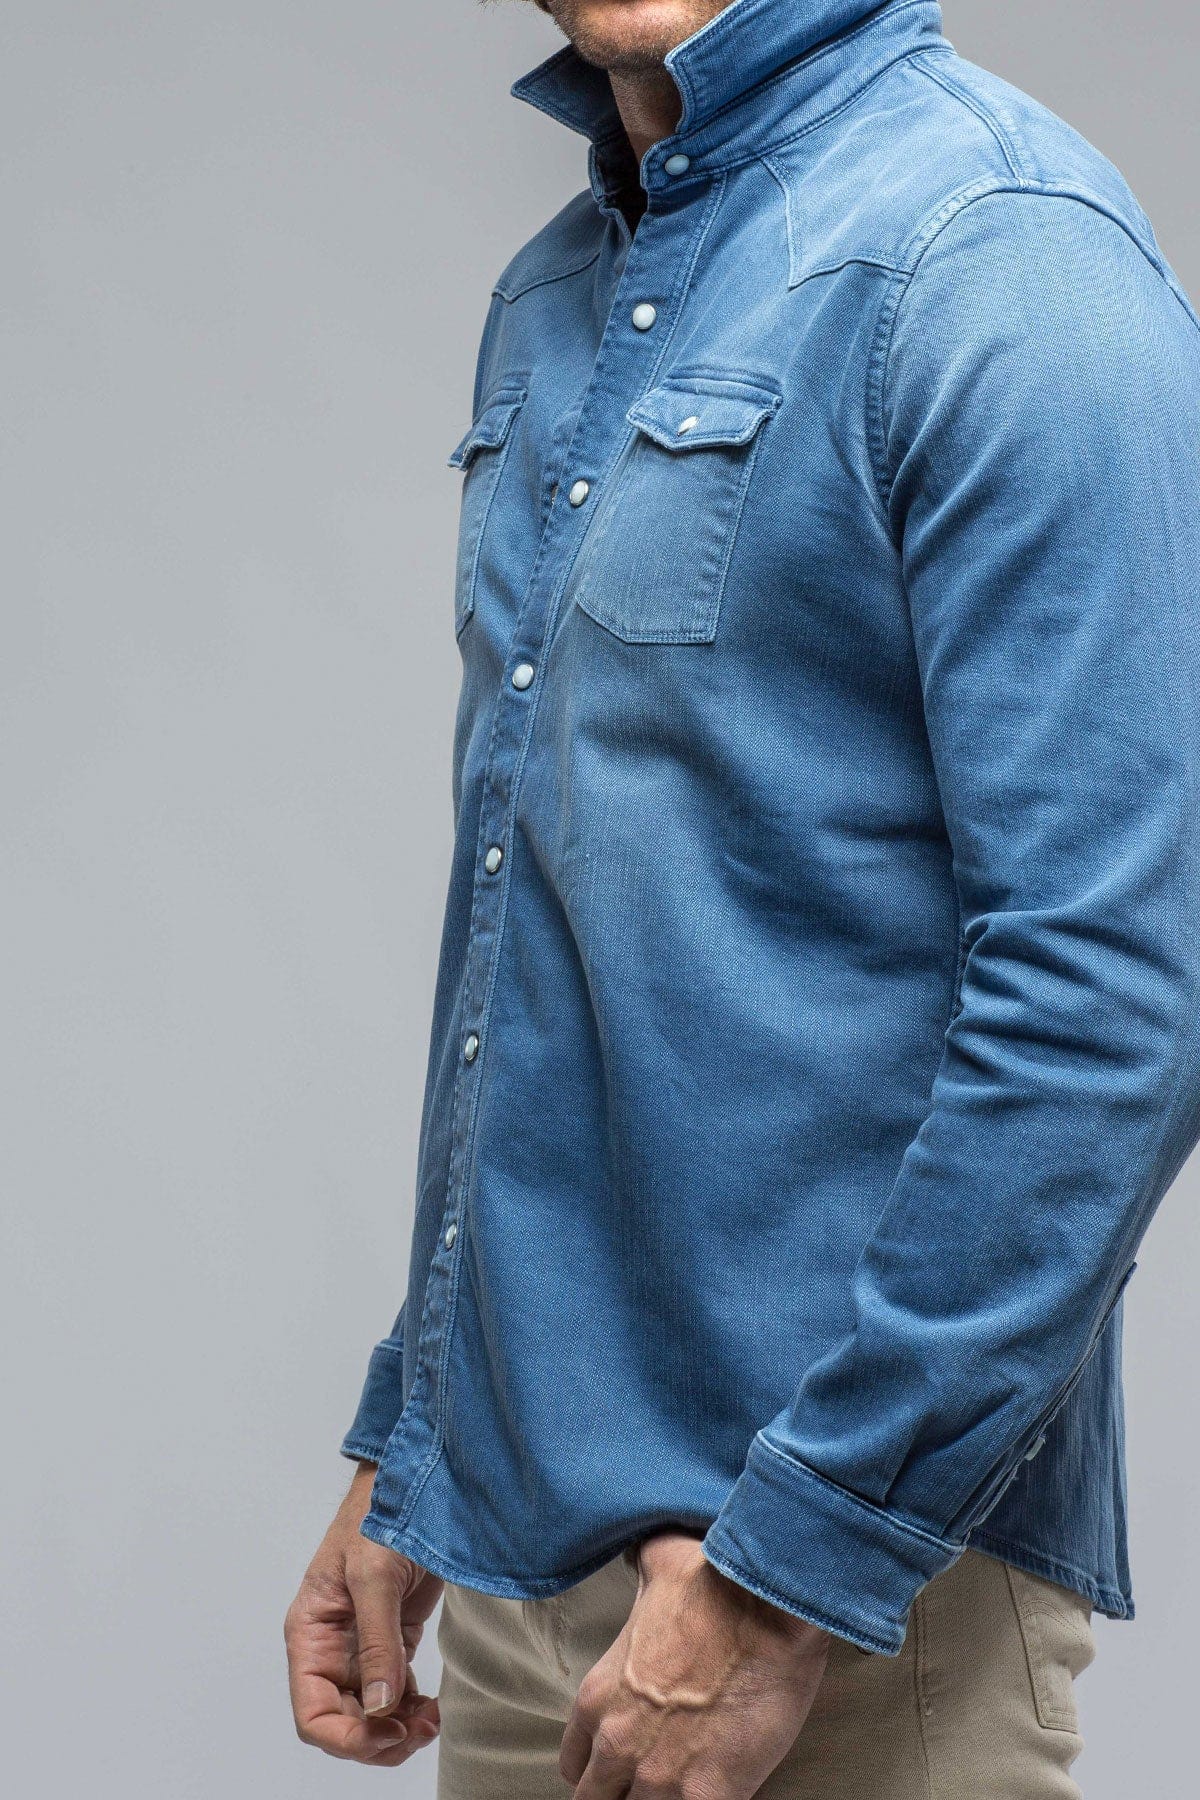 Ranger Colored Denim Snap Shirt In Olympic Blue - AXEL'S